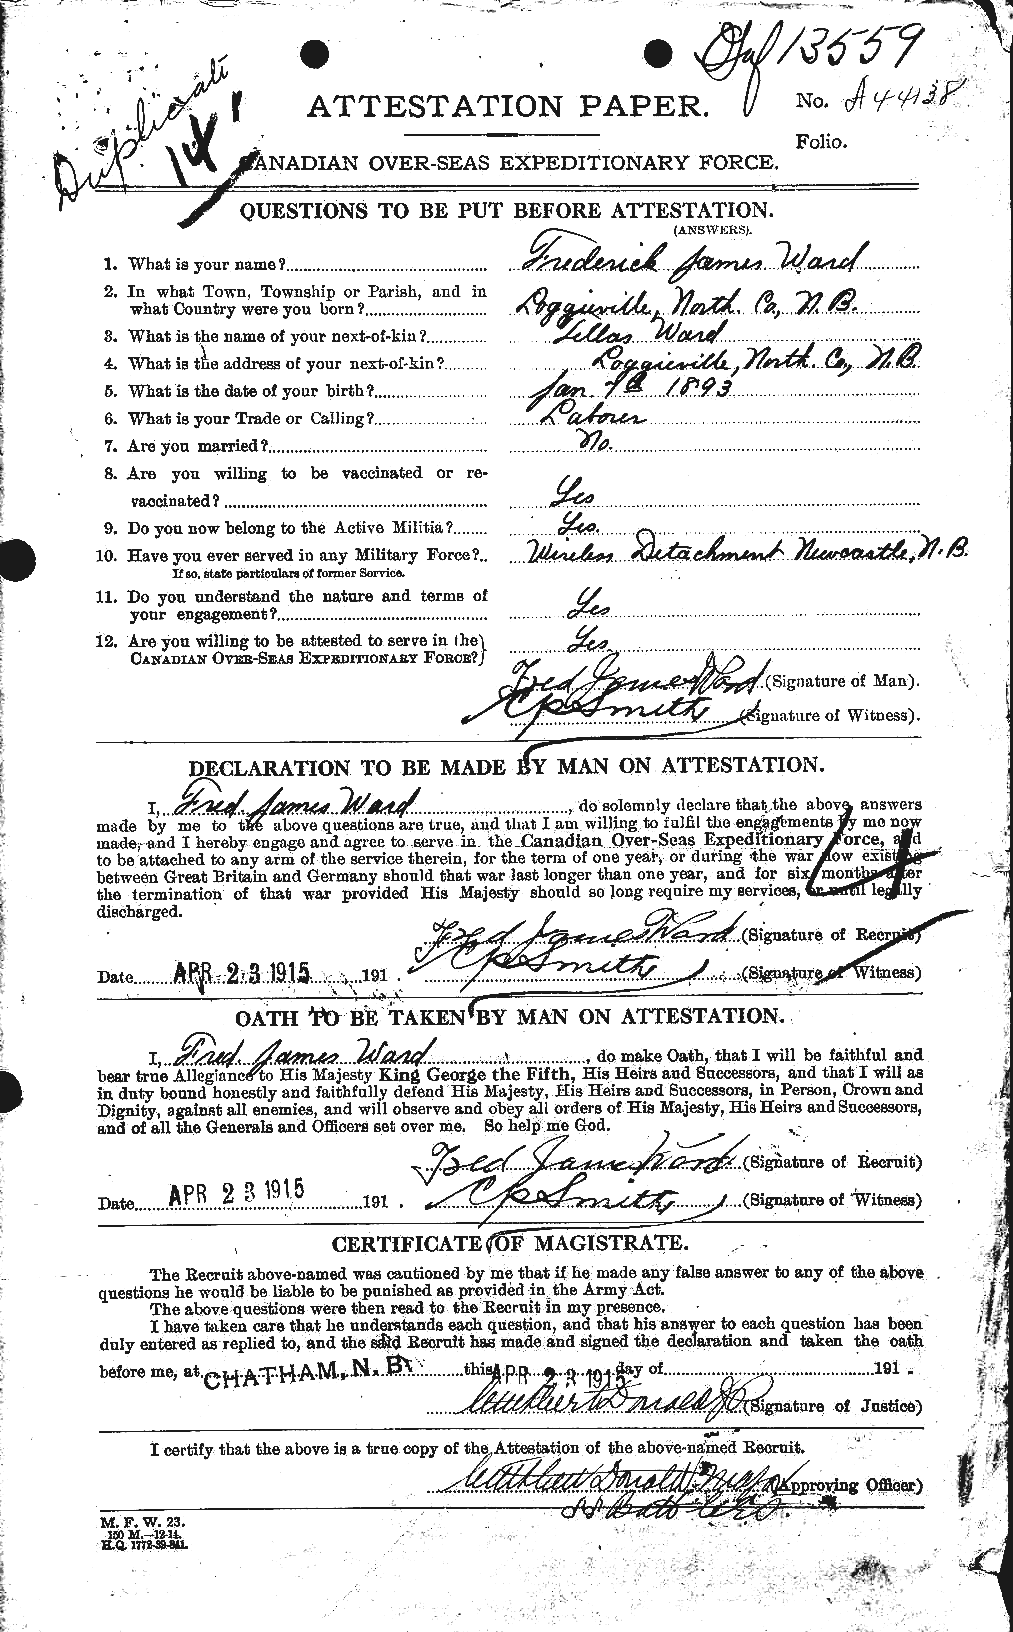 Personnel Records of the First World War - CEF 657725a